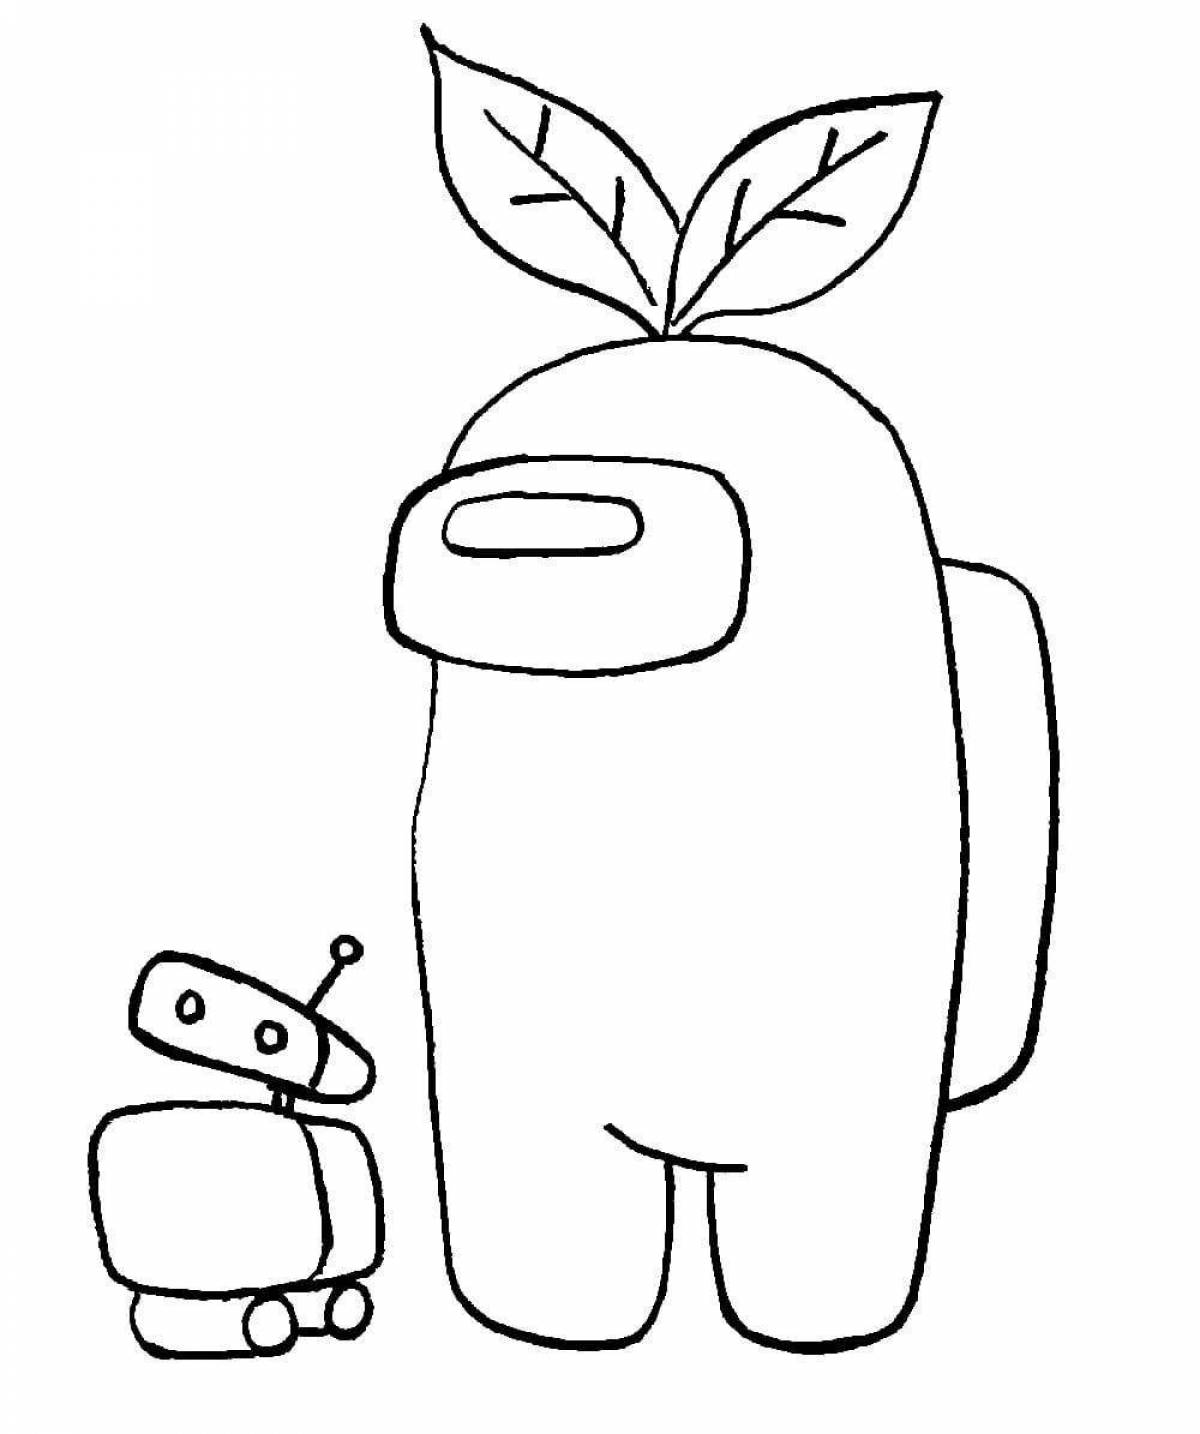 Cute ammobus coloring page